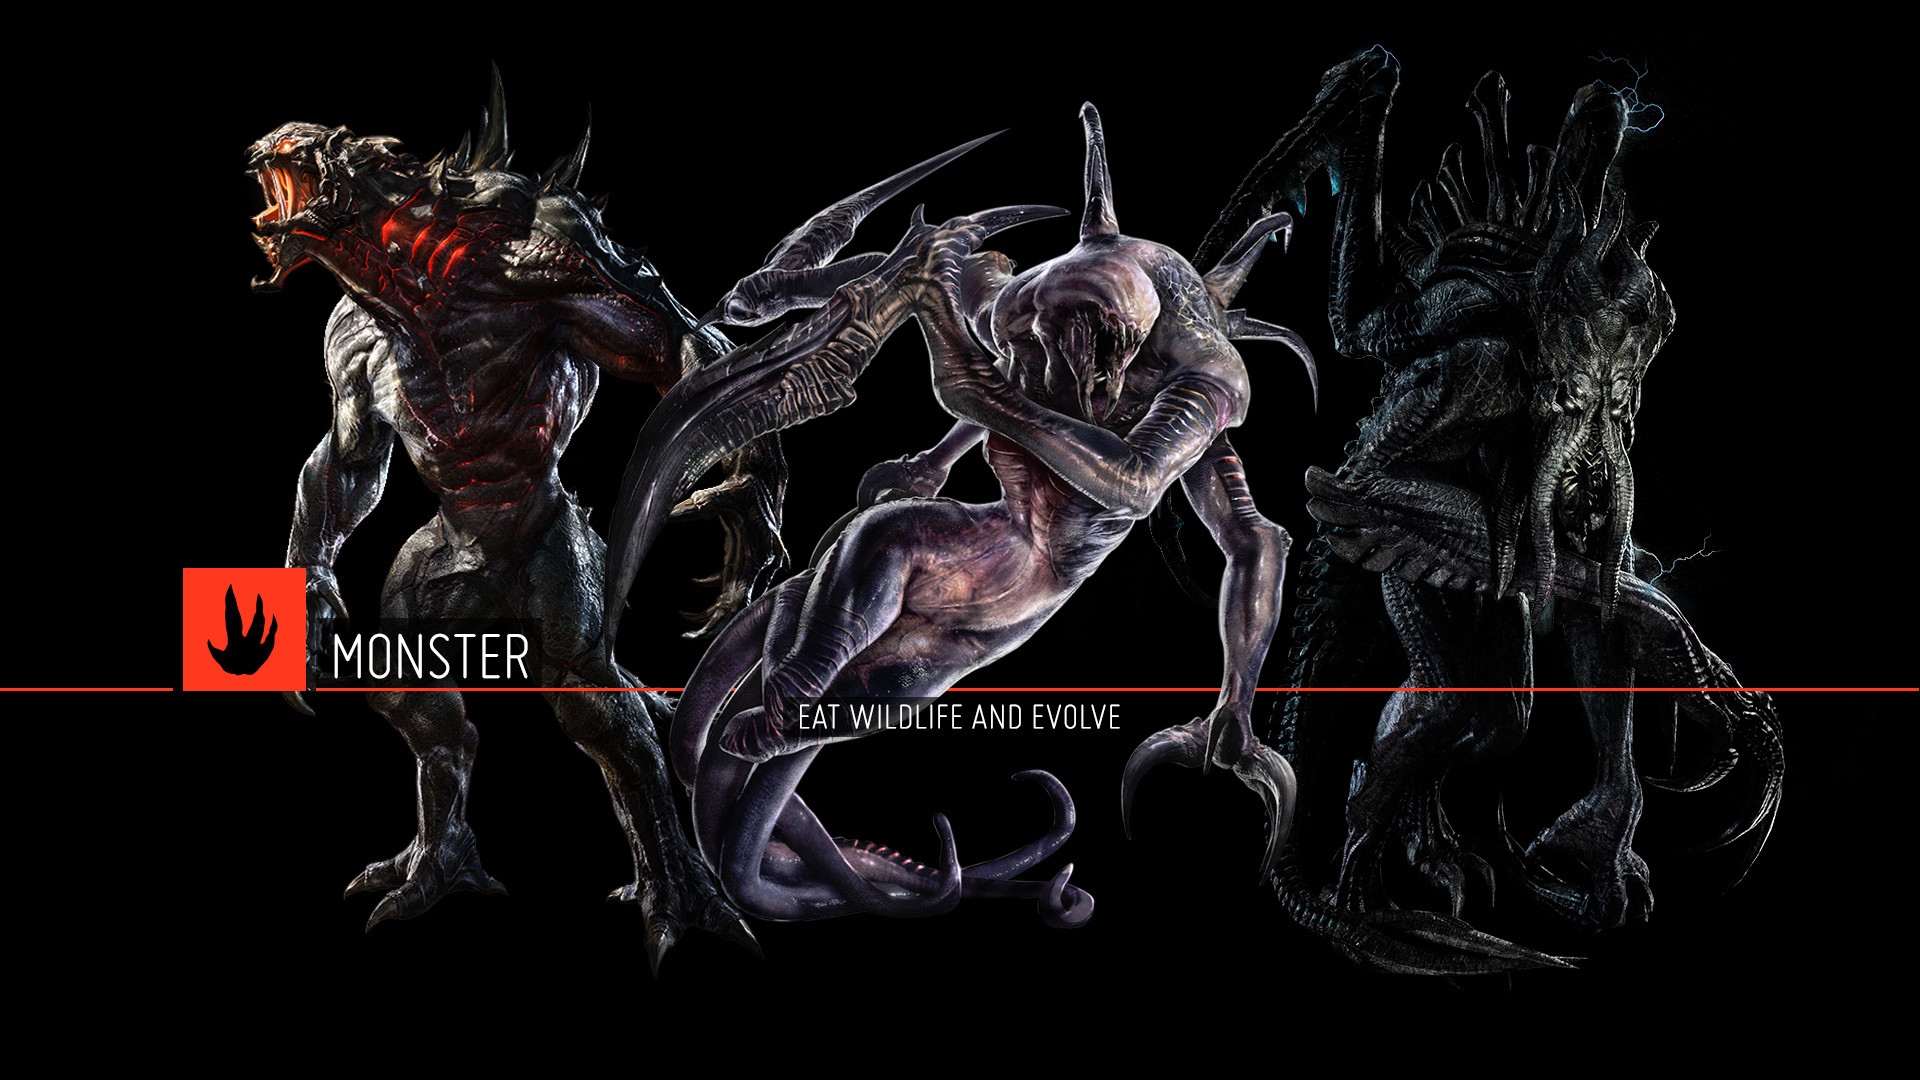 Made more wallpapers for Evolve FEEDBACK is greatly appreciated smile image image image image